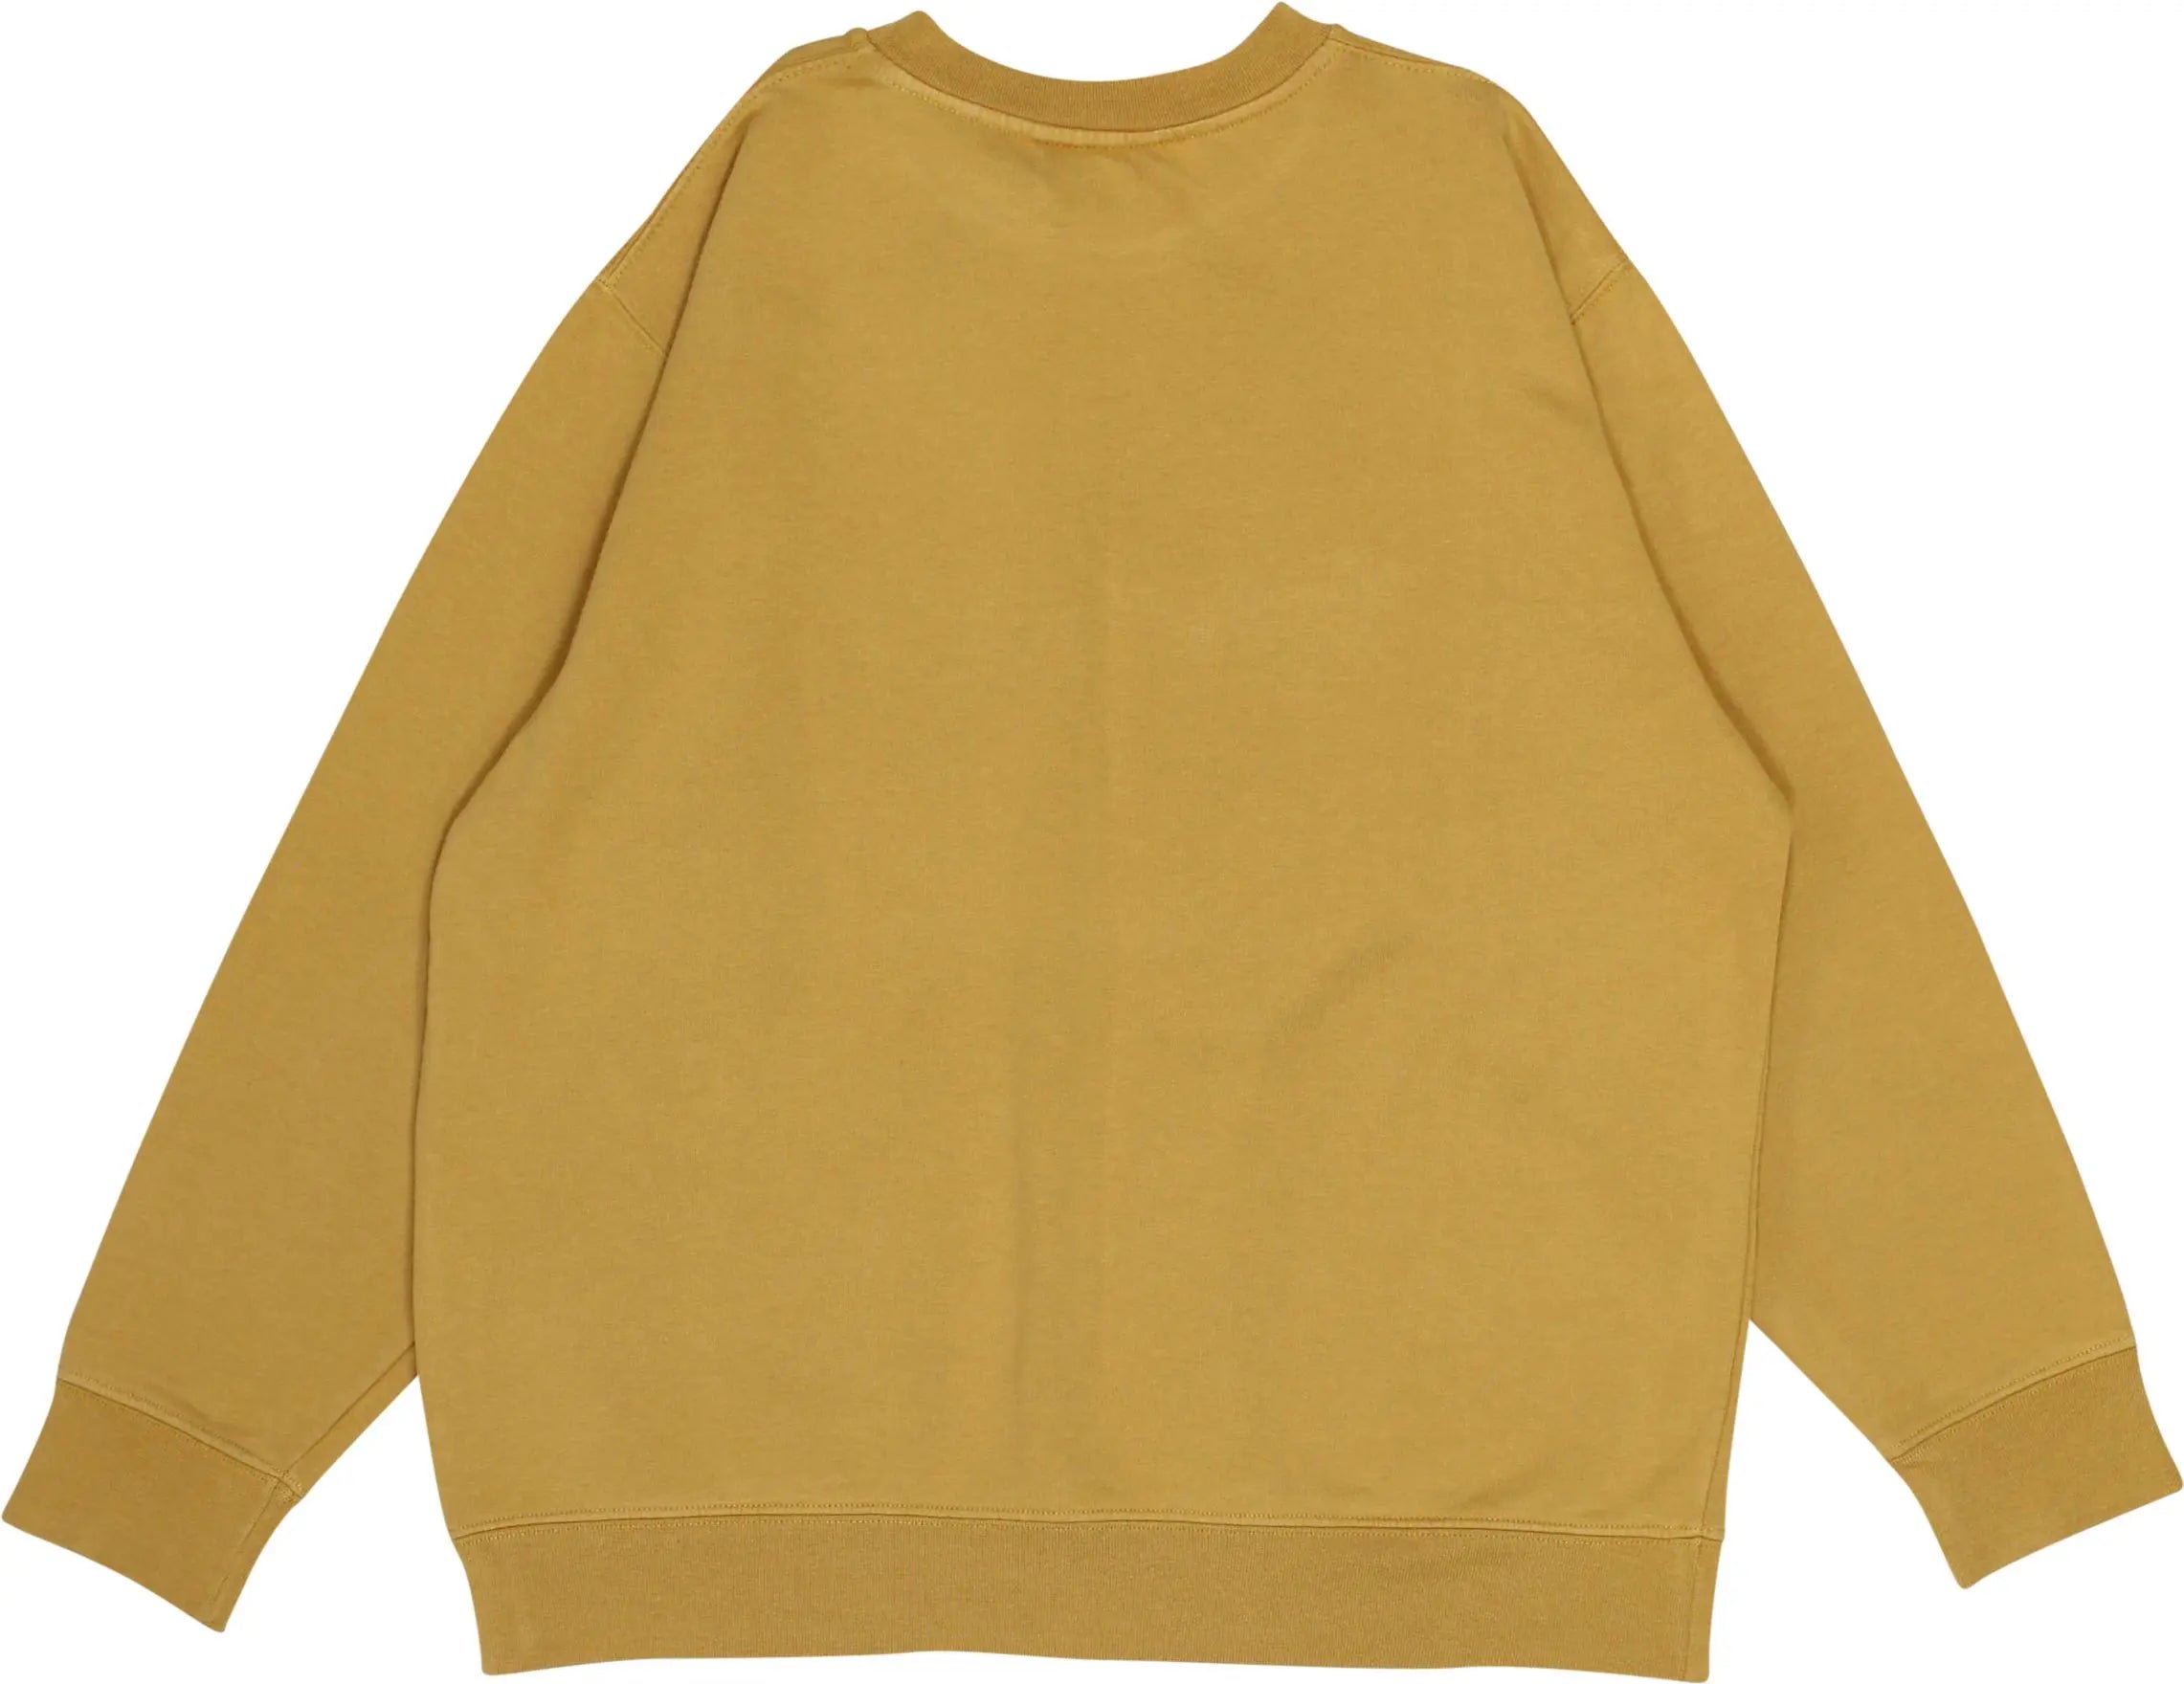 Timberland - Yellow Sweatshirt by Timberland- ThriftTale.com - Vintage and second handclothing